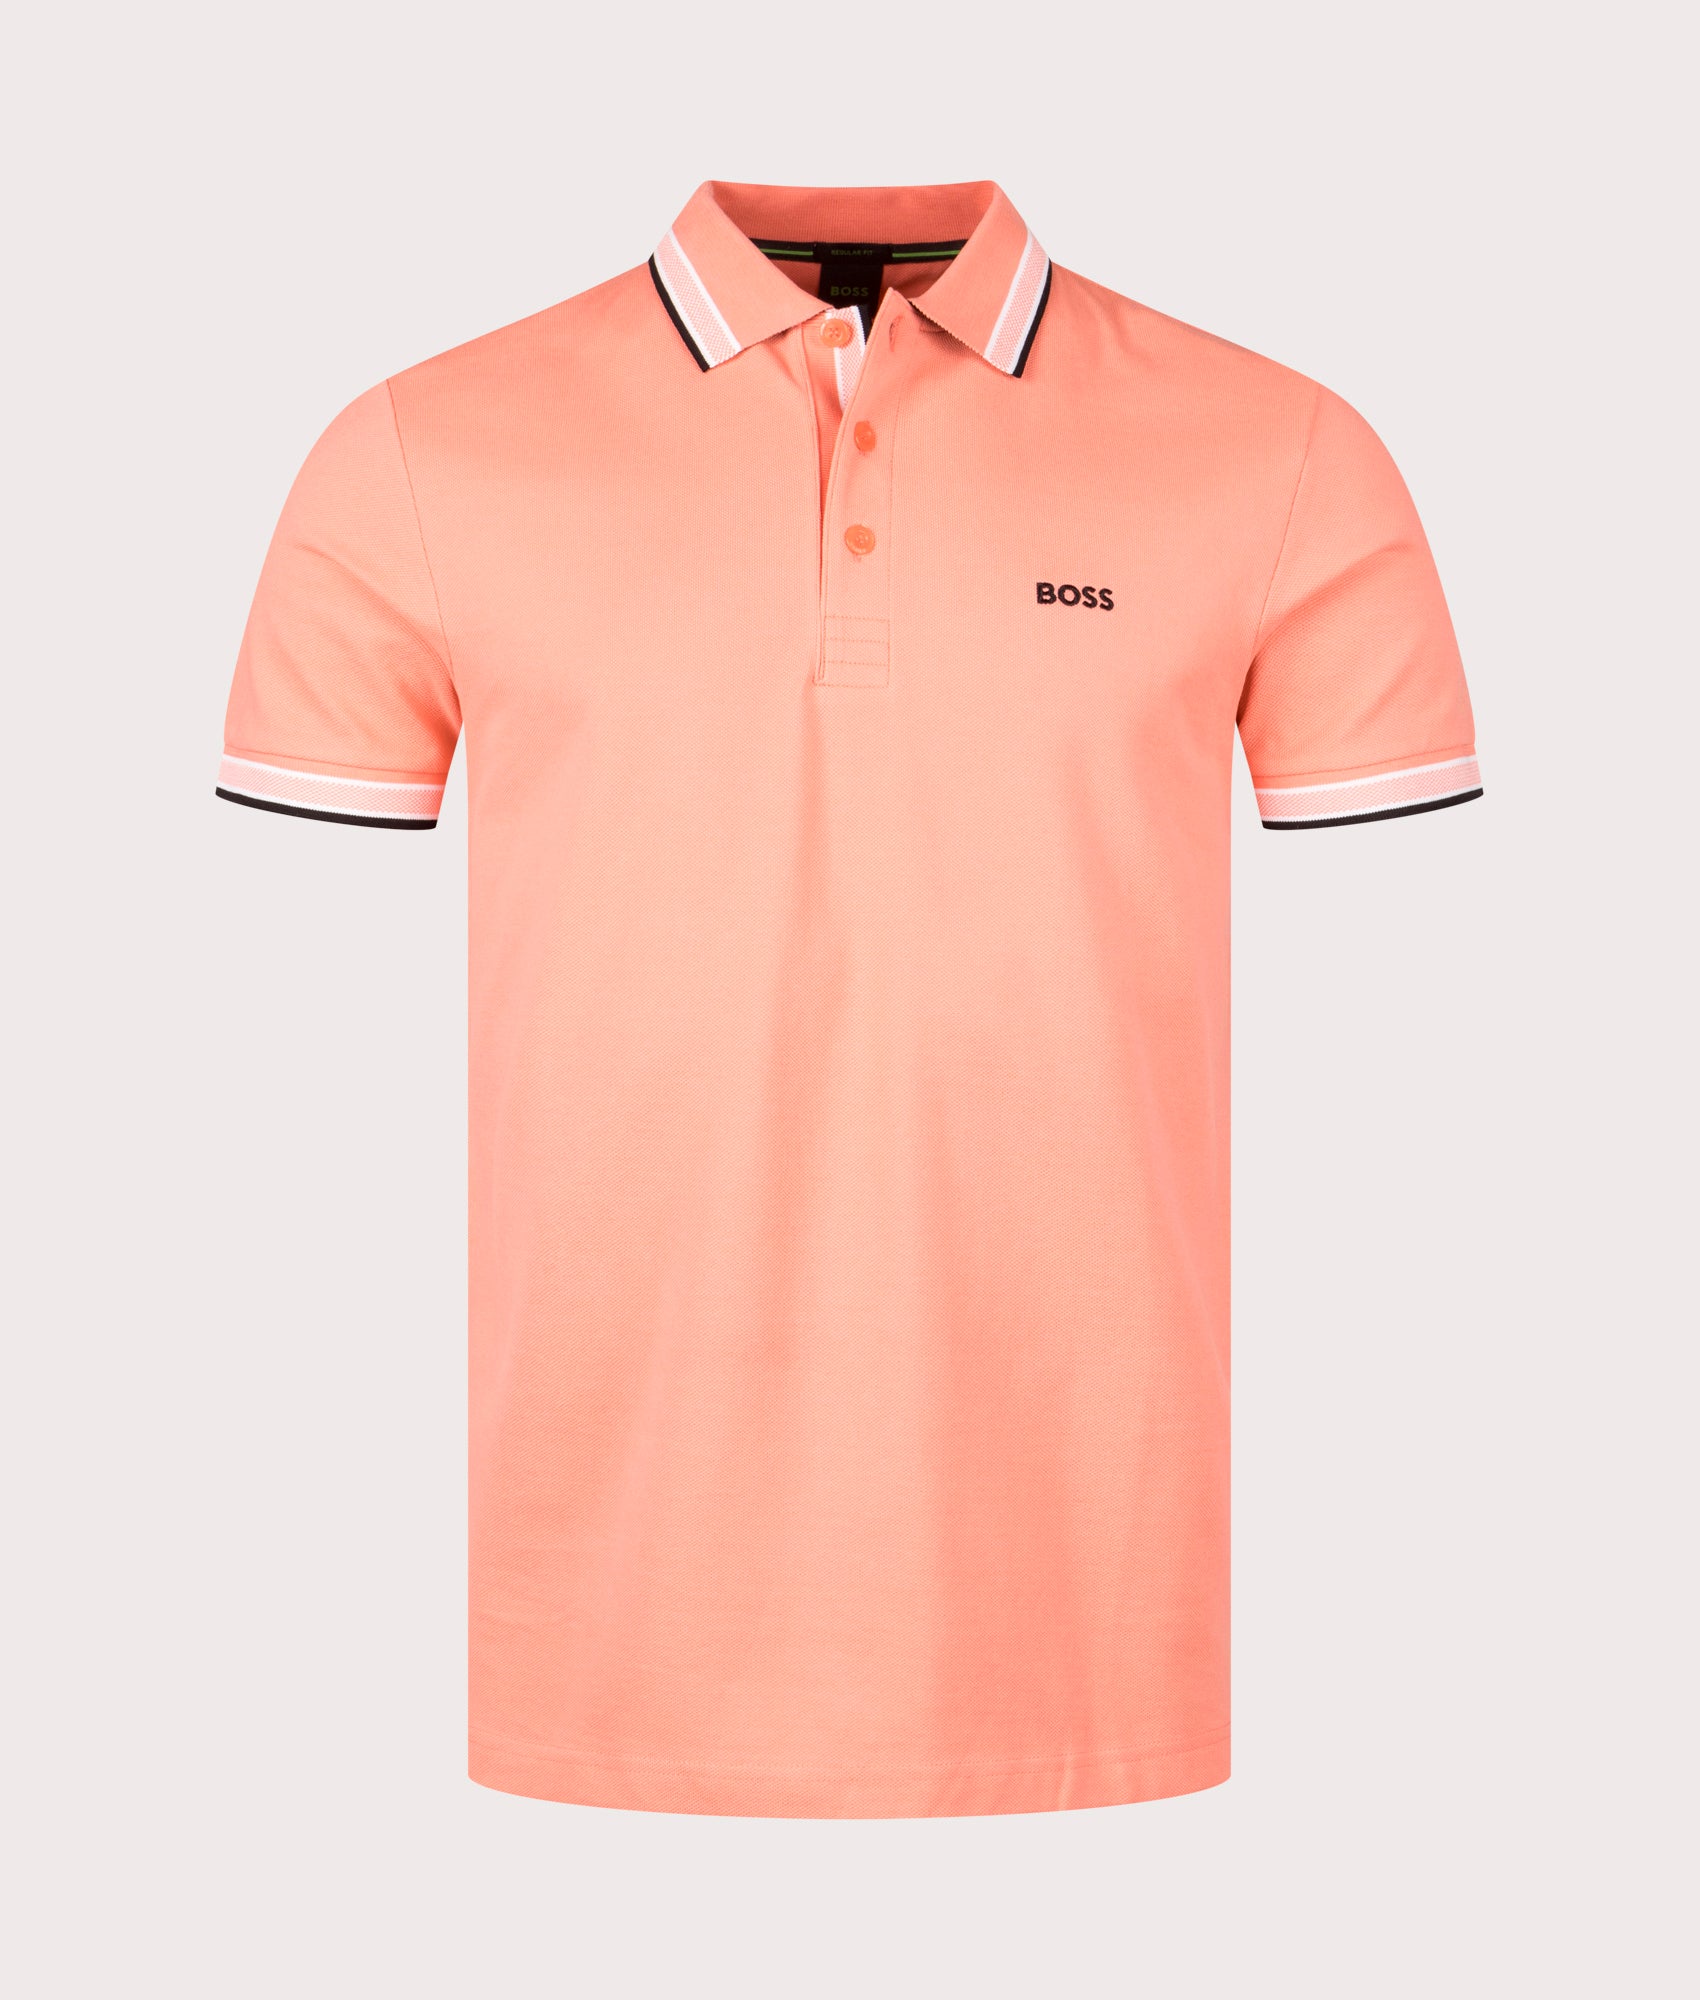 BOSS Mens Paddy Polo Shirt - Colour: 649 Open Red - Size: Large